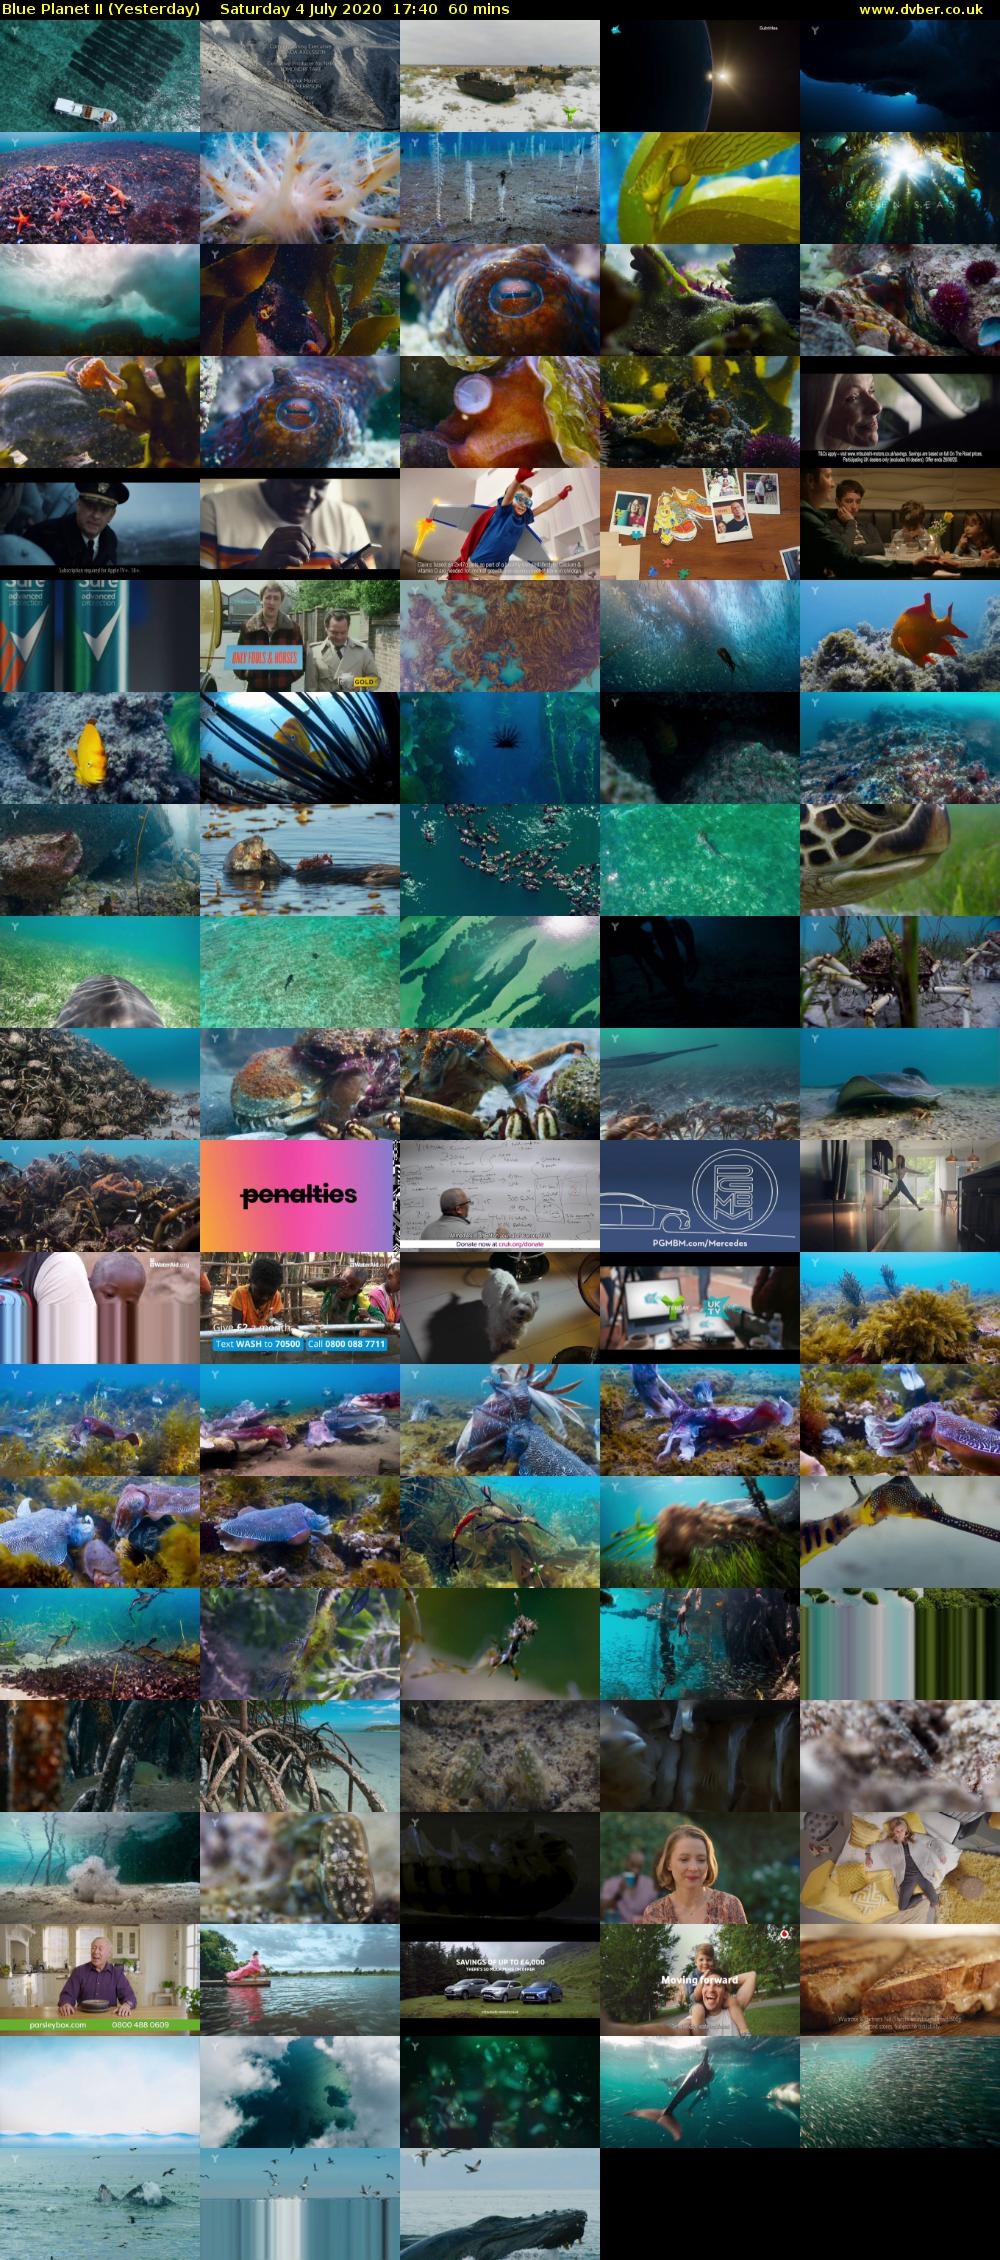 Blue Planet II (Yesterday) Saturday 4 July 2020 17:40 - 18:40